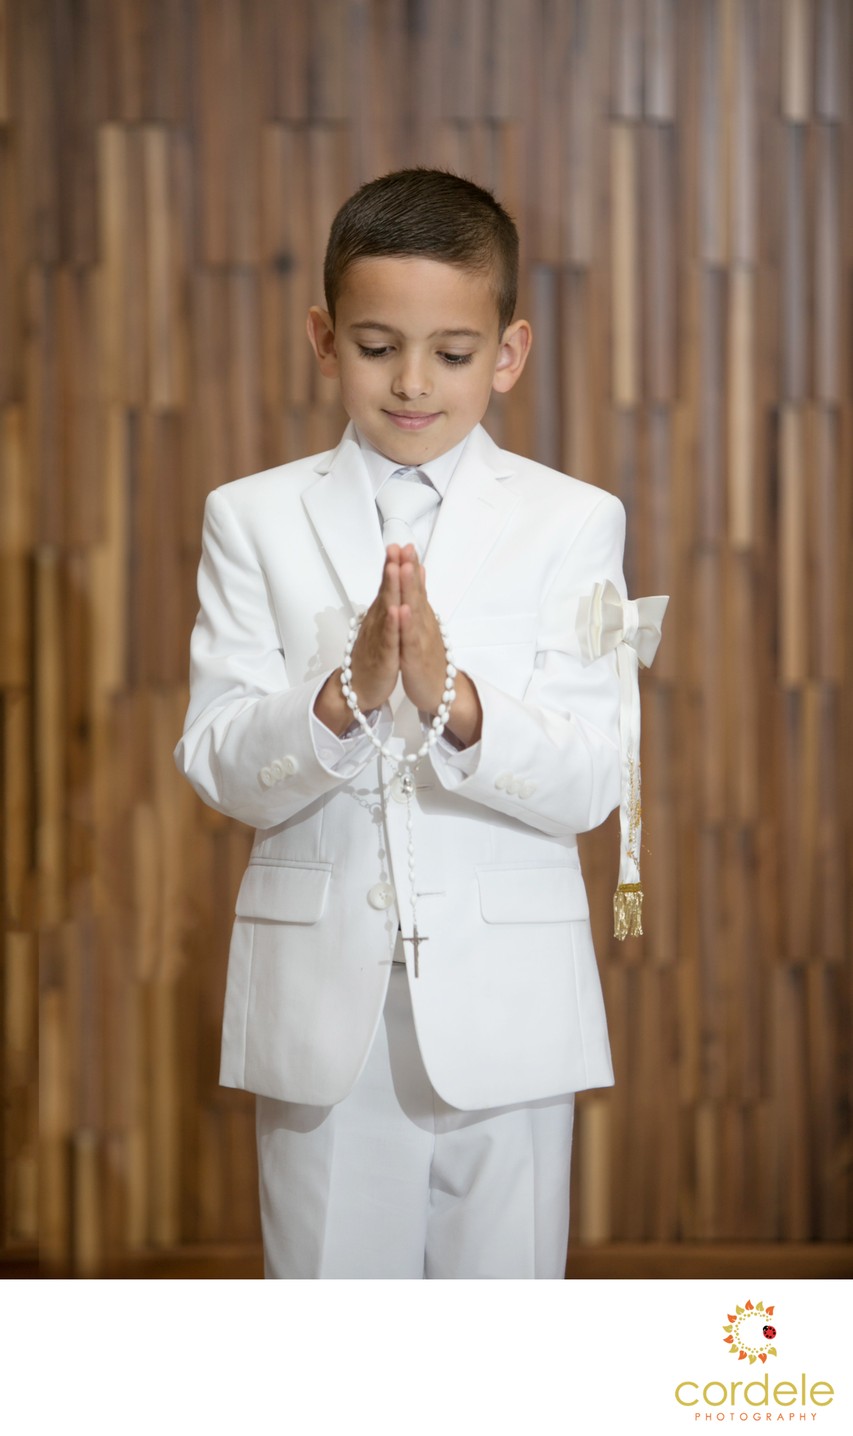 First Communion Photos in Andover